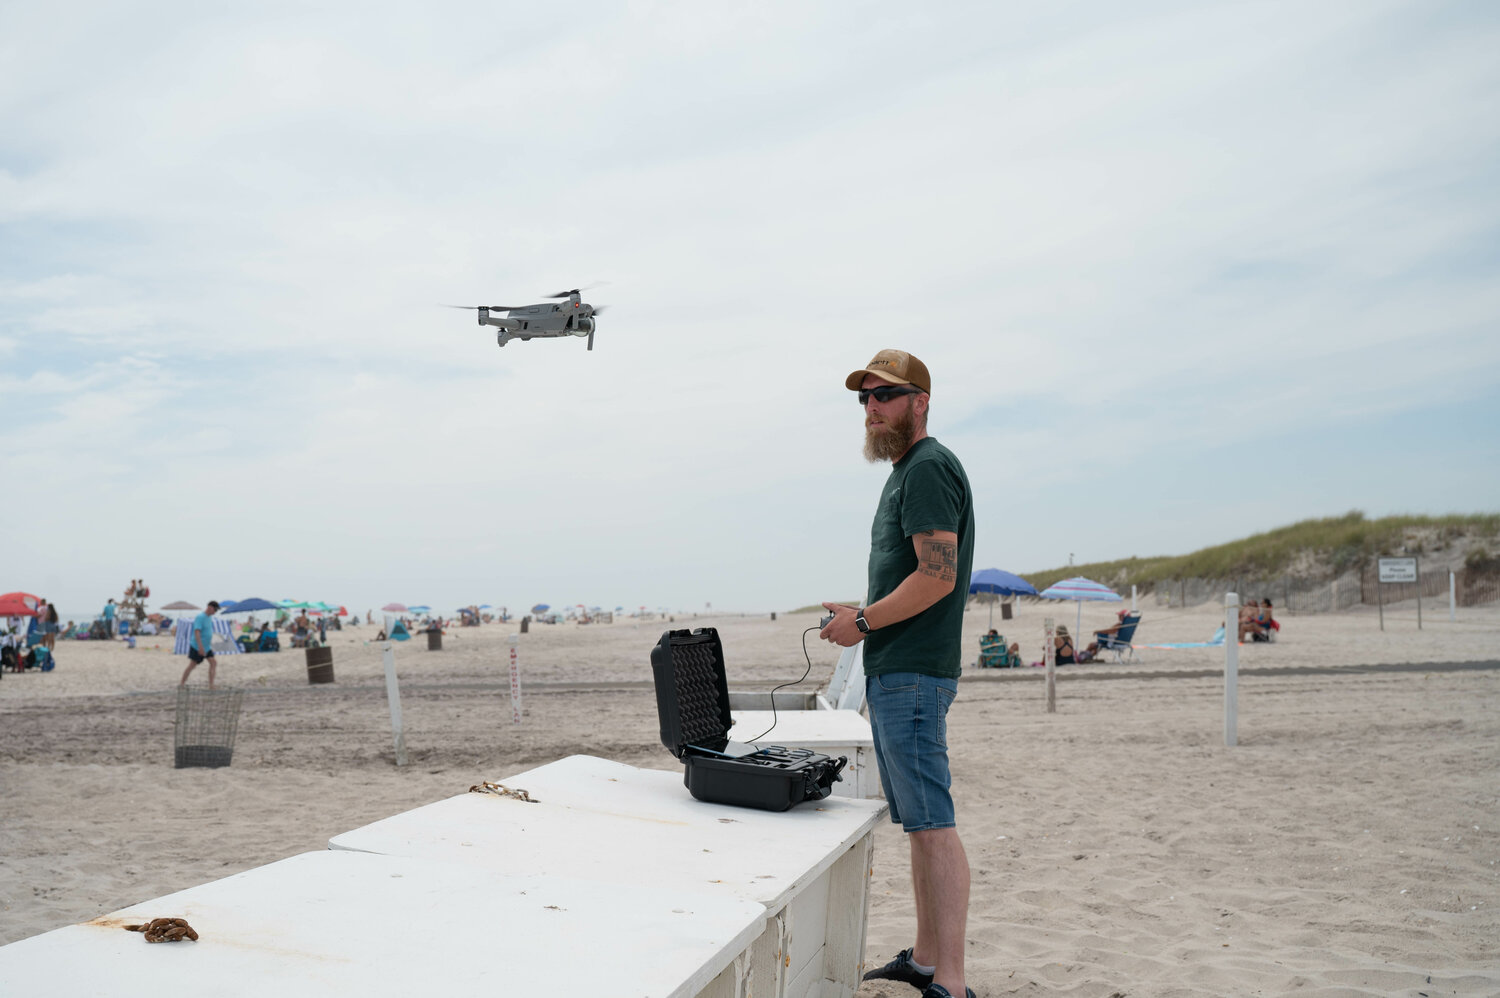 A state employee demonstrates how a drone works to identify sharks in the waters of Long Island’s South Shore beaches.